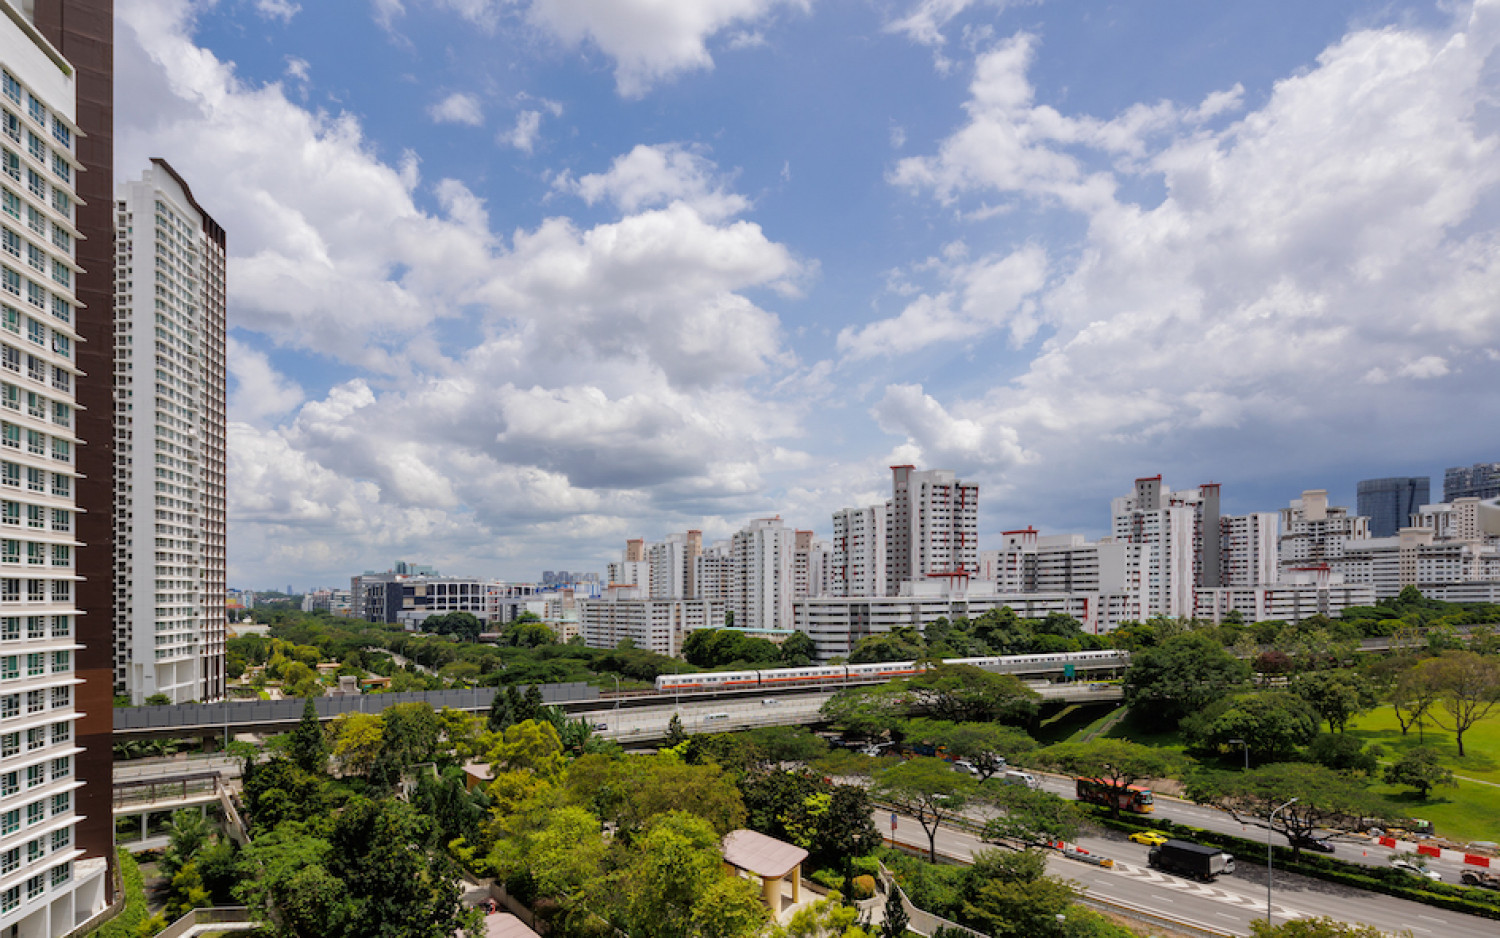 HDB flash estimate shows 2.6% q-o-q increase in resale flat prices in 2Q2022 - Property News